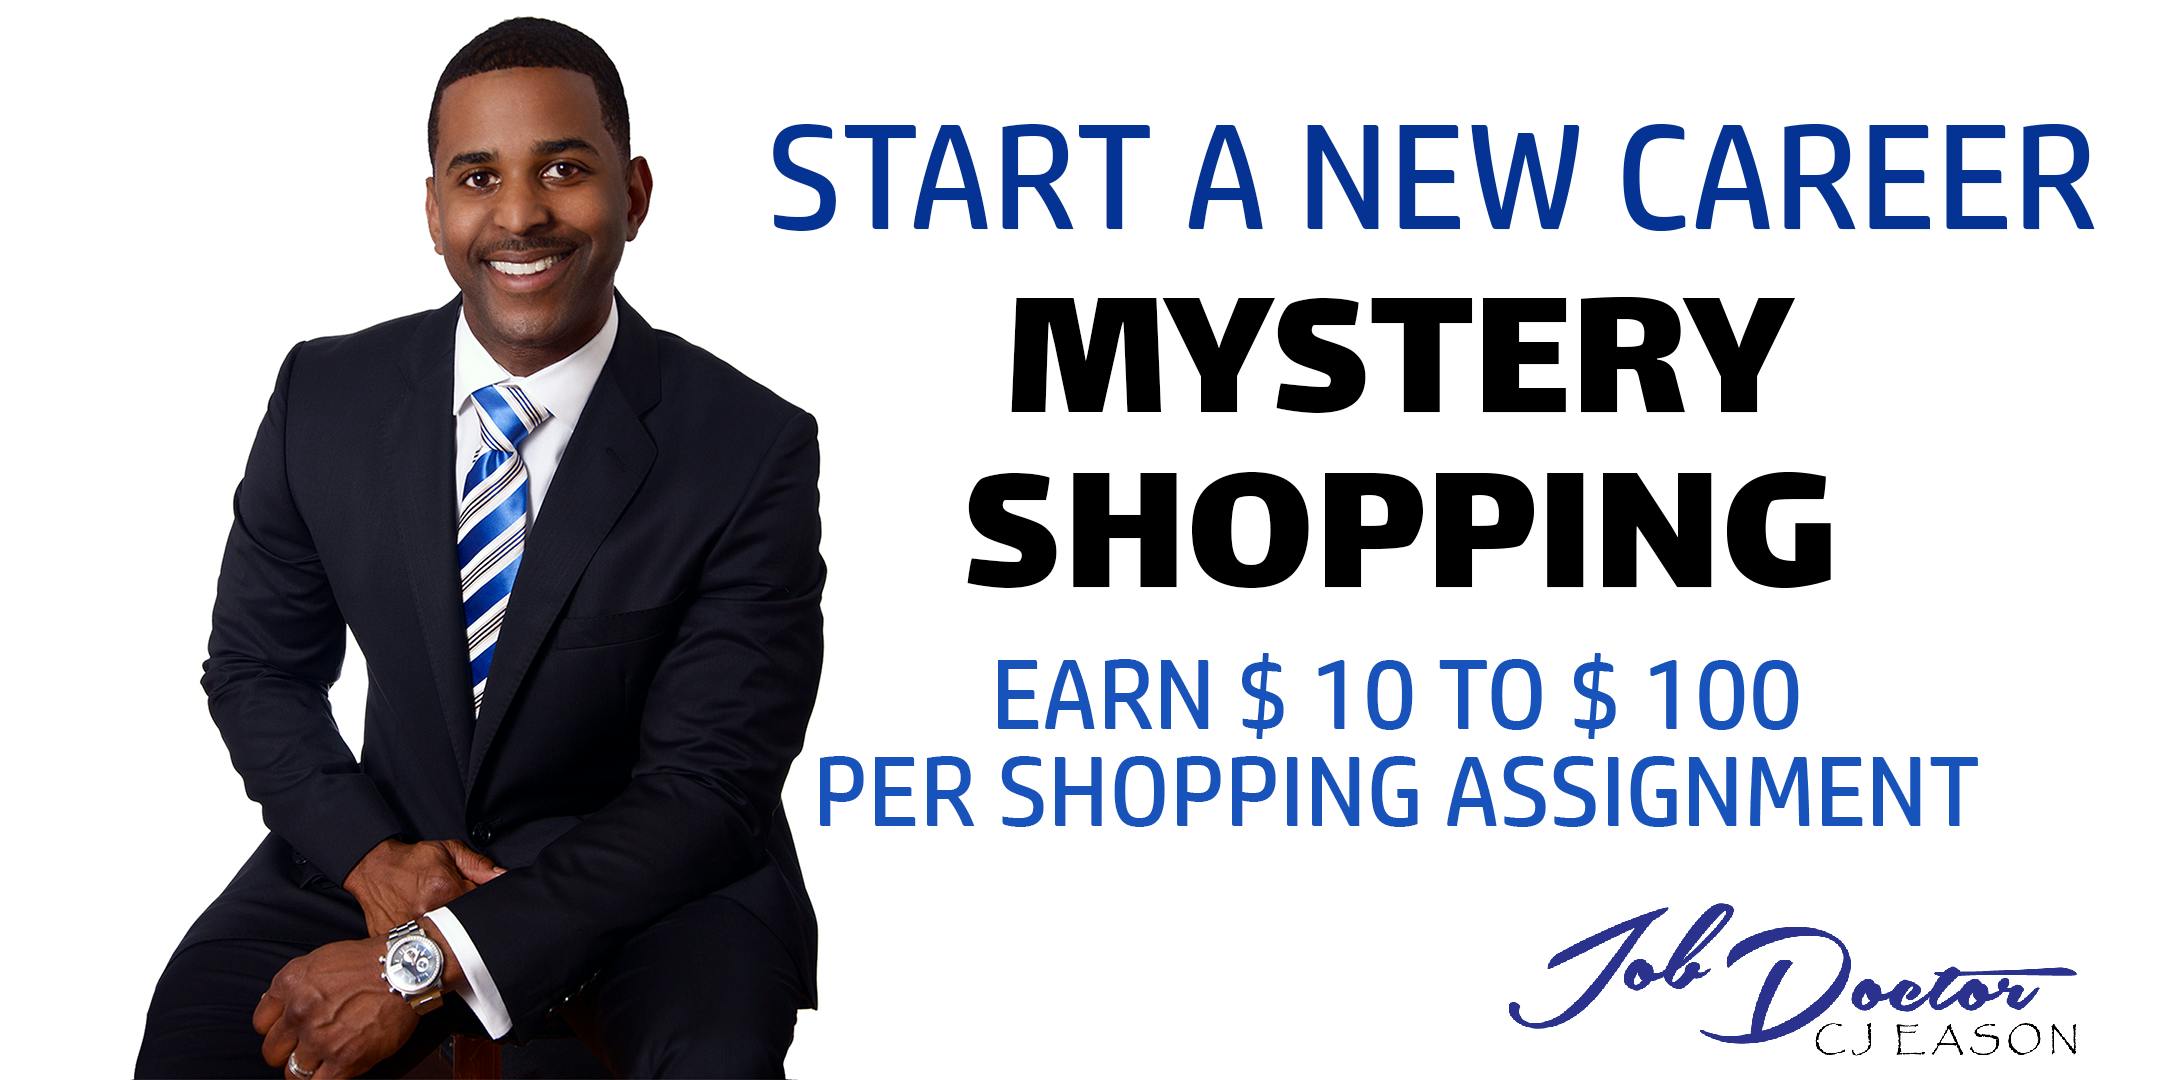 How To Make Money Mystery Shopping